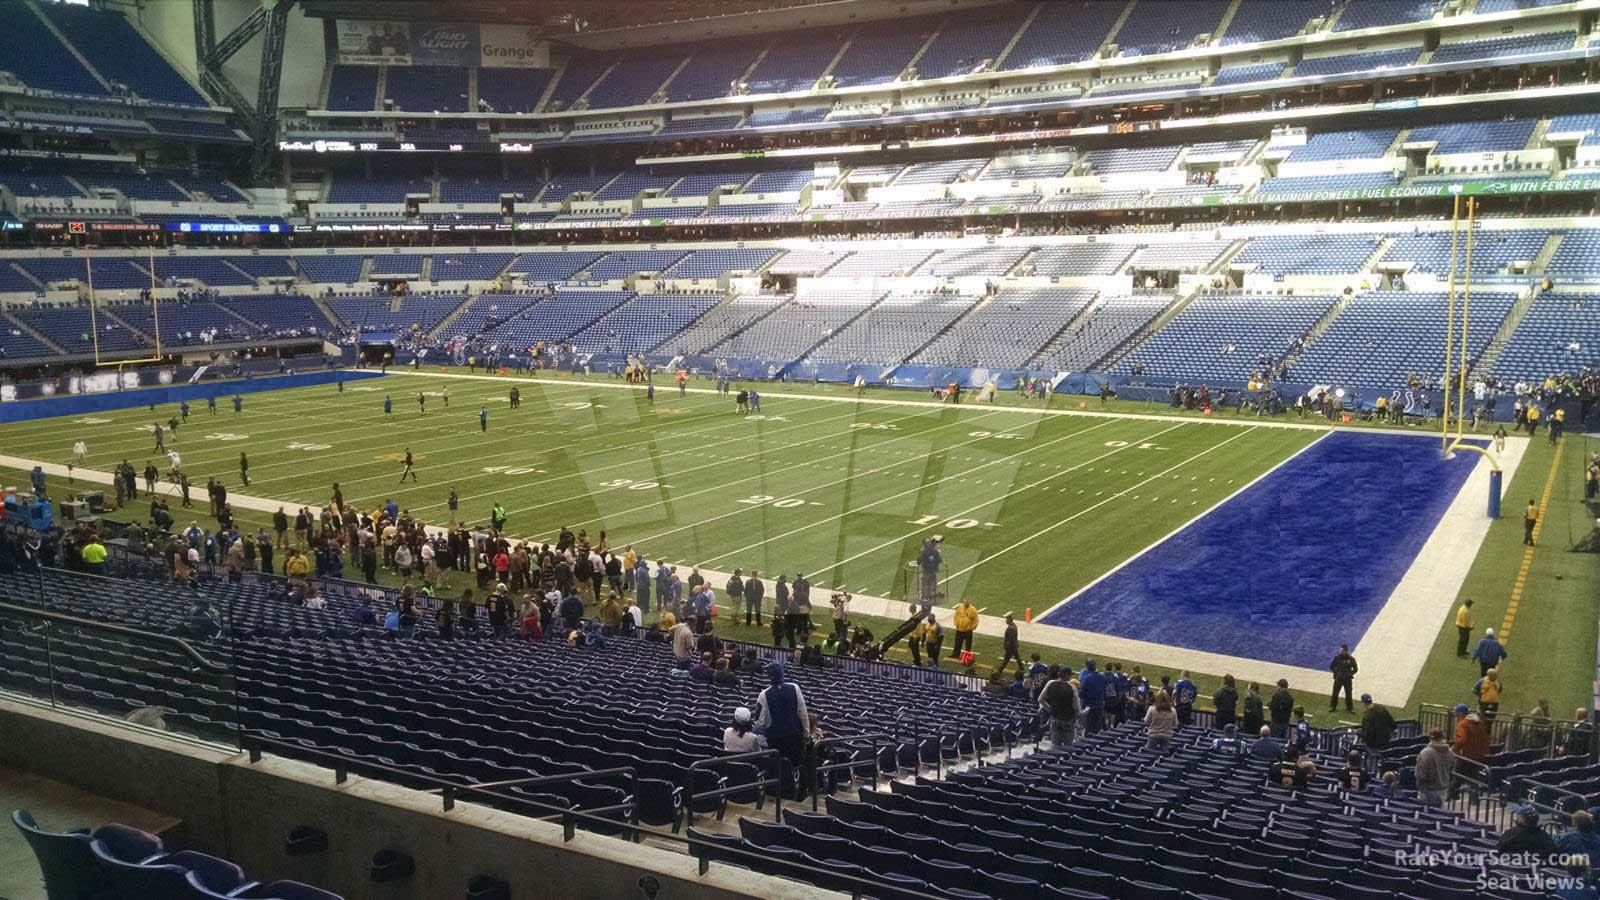 section 208, row 5 seat view  for football - lucas oil stadium